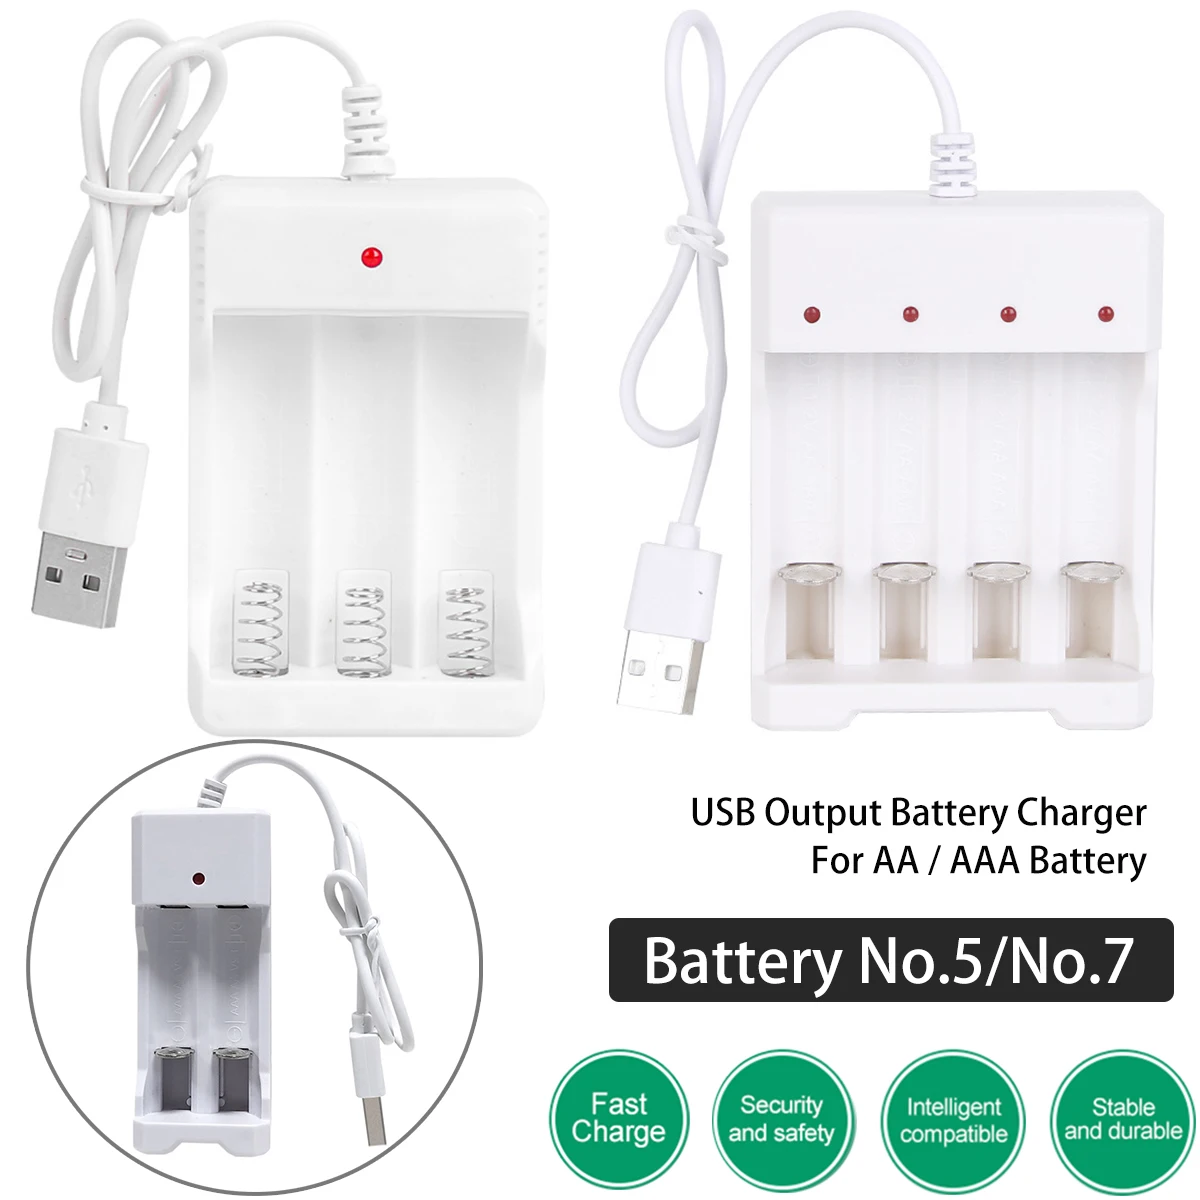 Battery Charger 4-Slot USB AA/AAA Ni-MH/Ni-Cd Independent Rechargeable Battery Chargers For Remote Control Battery No. 5 No. 7